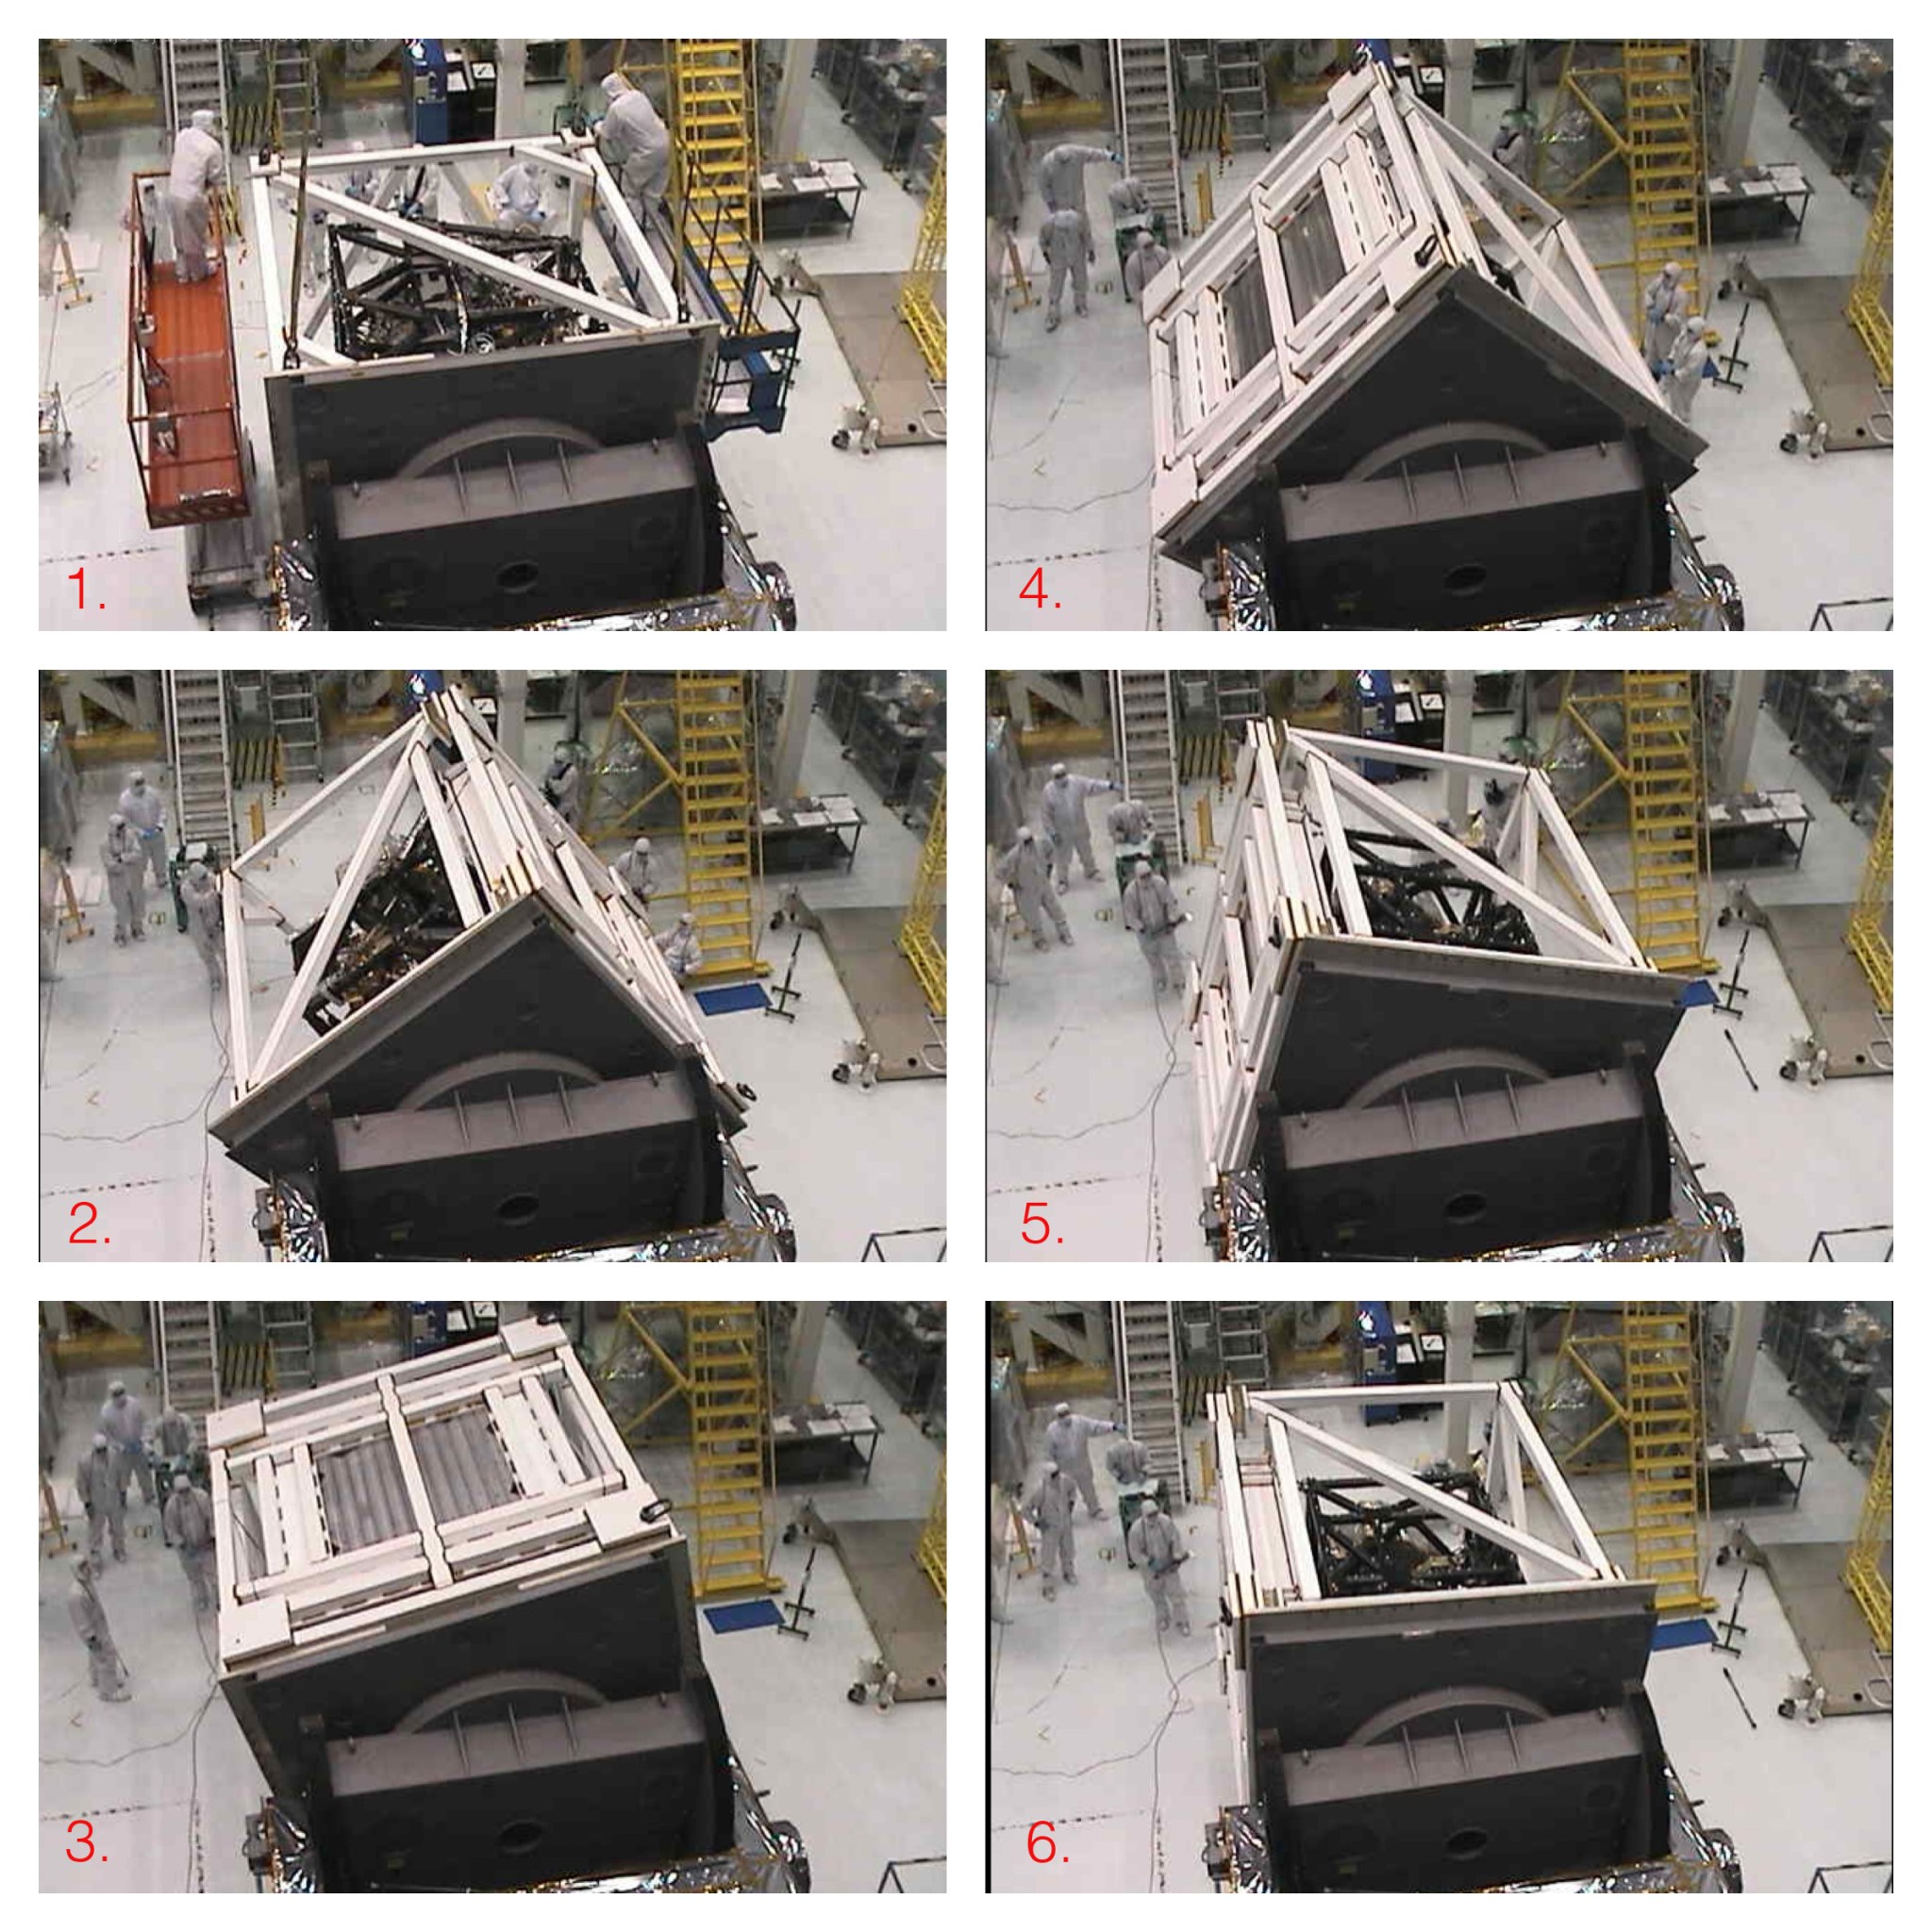 Six images of ISIM throughout the text. The silver cube-shaped frame is being rotated, and each image shows it further rotated. People in white clean room suits are watching from the ground.